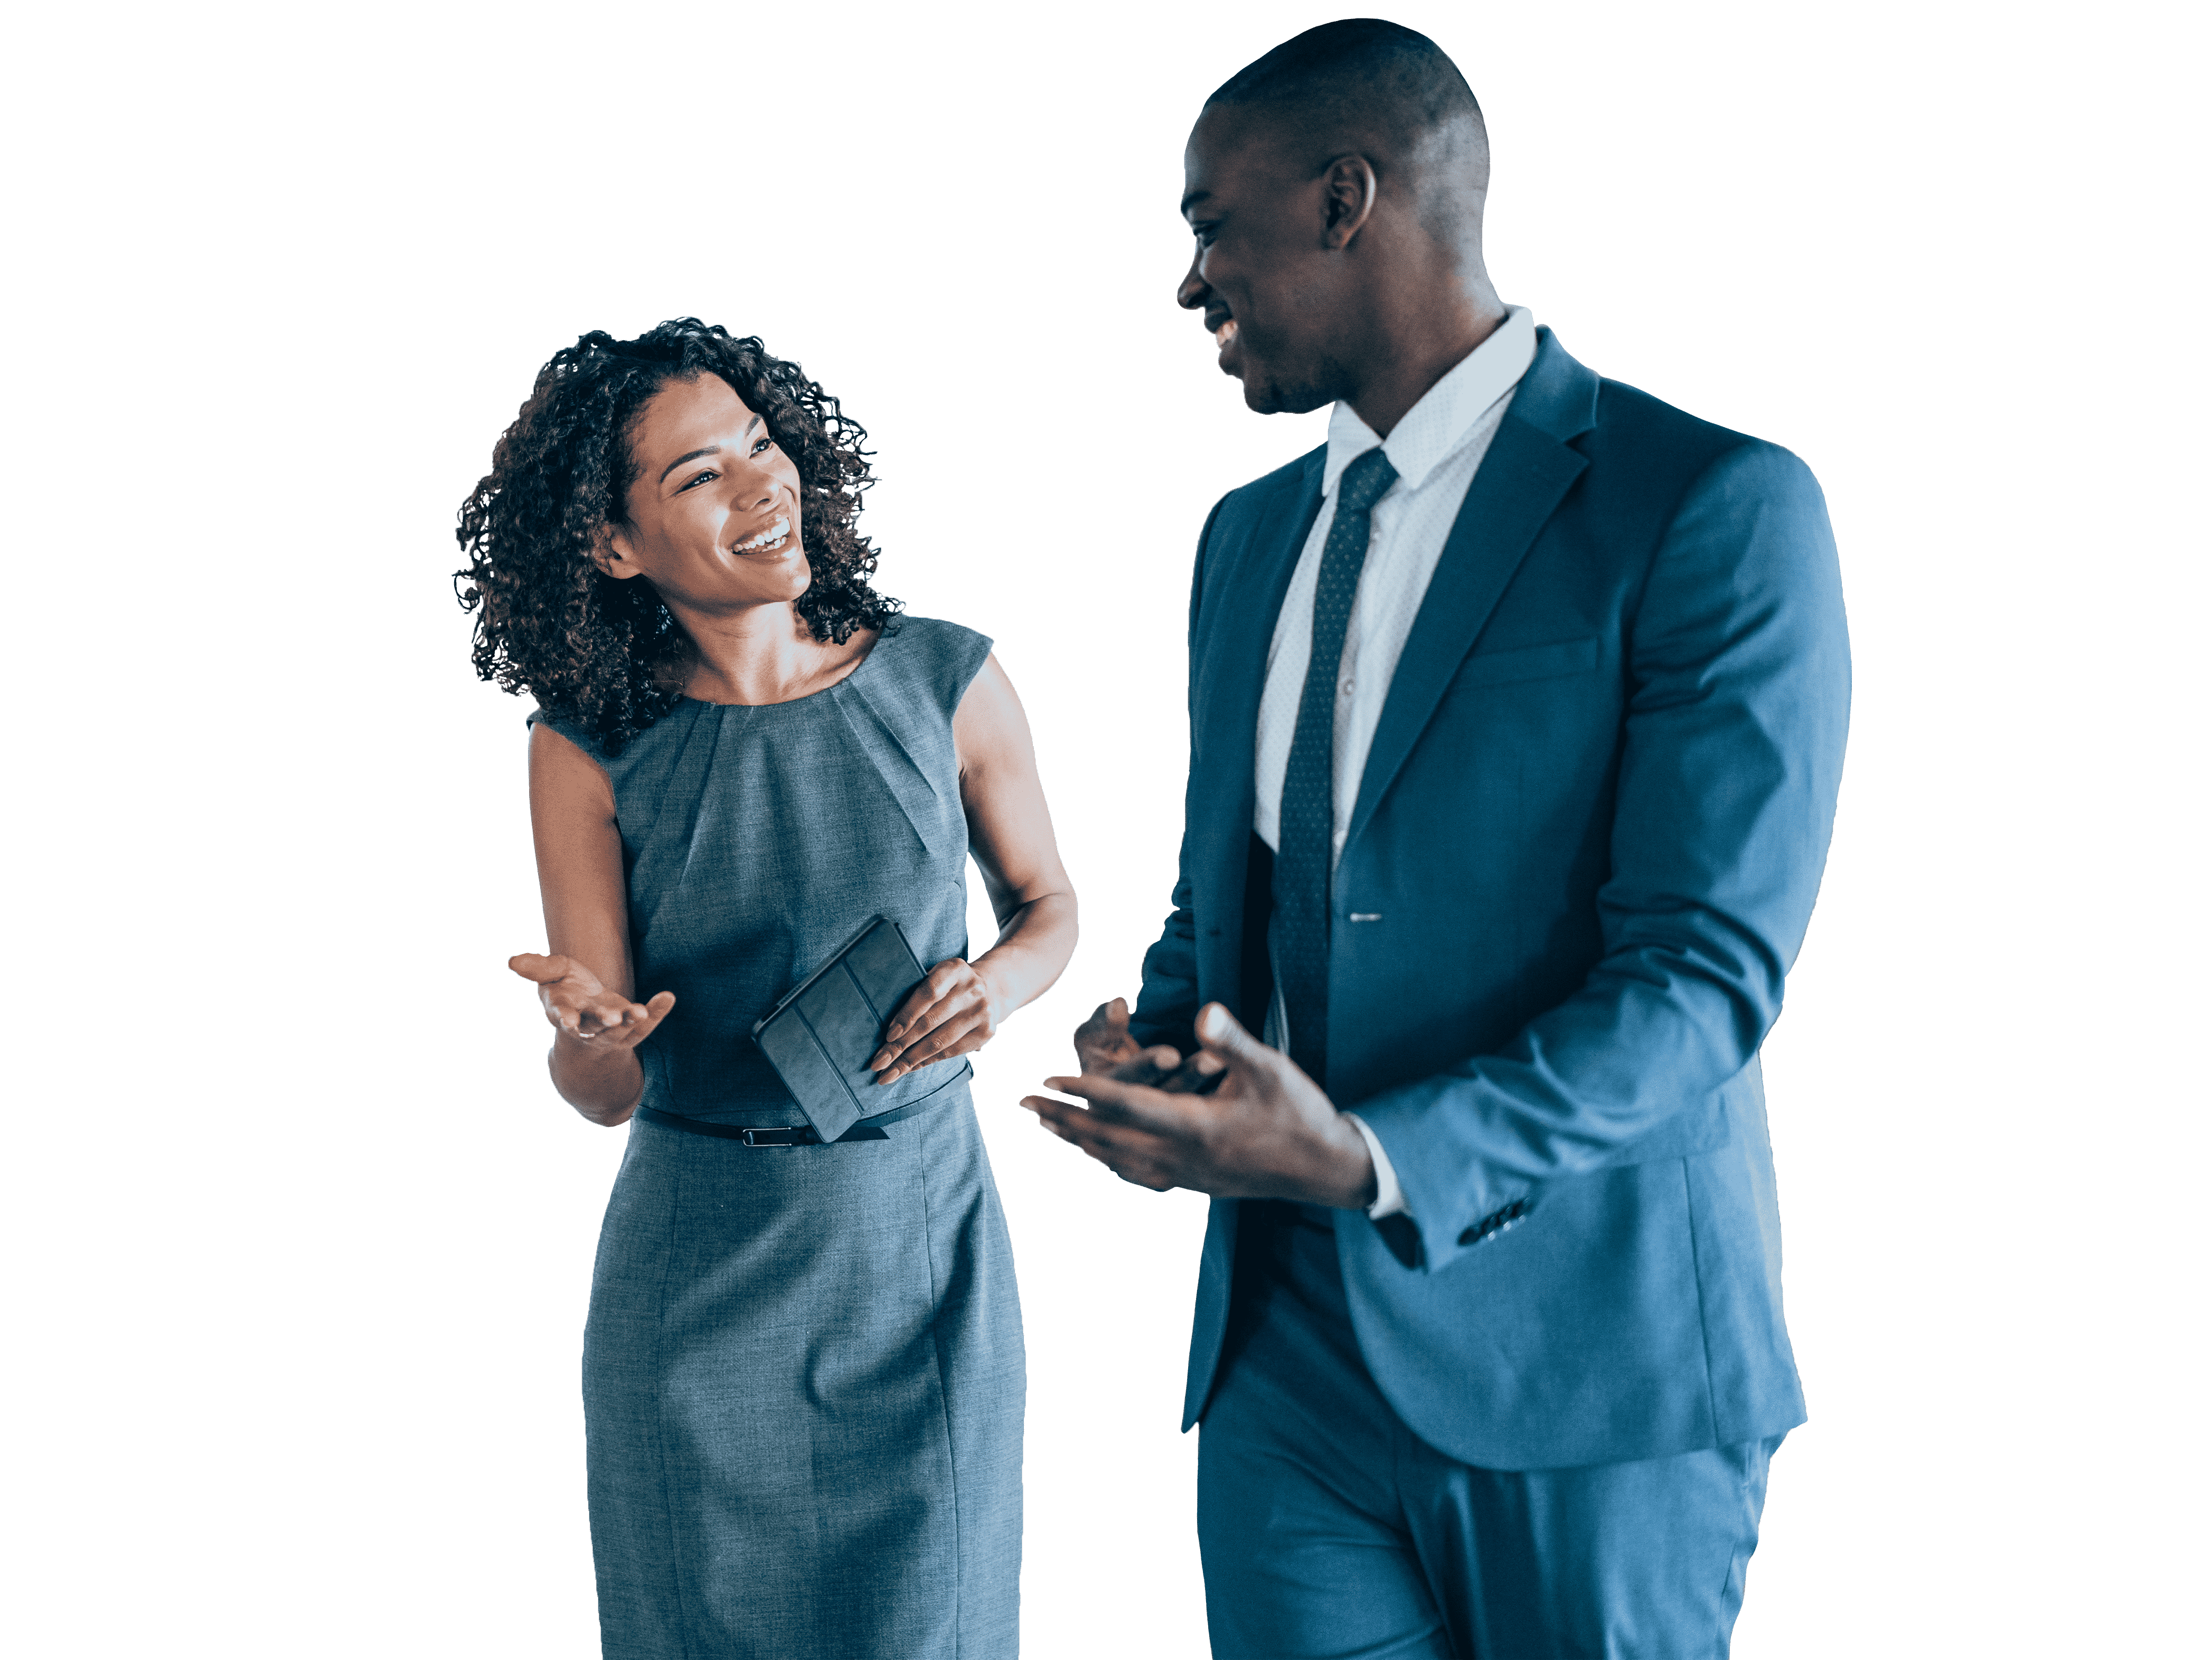 Diverse man and woman discussing work and smiling while woman holds tablet device